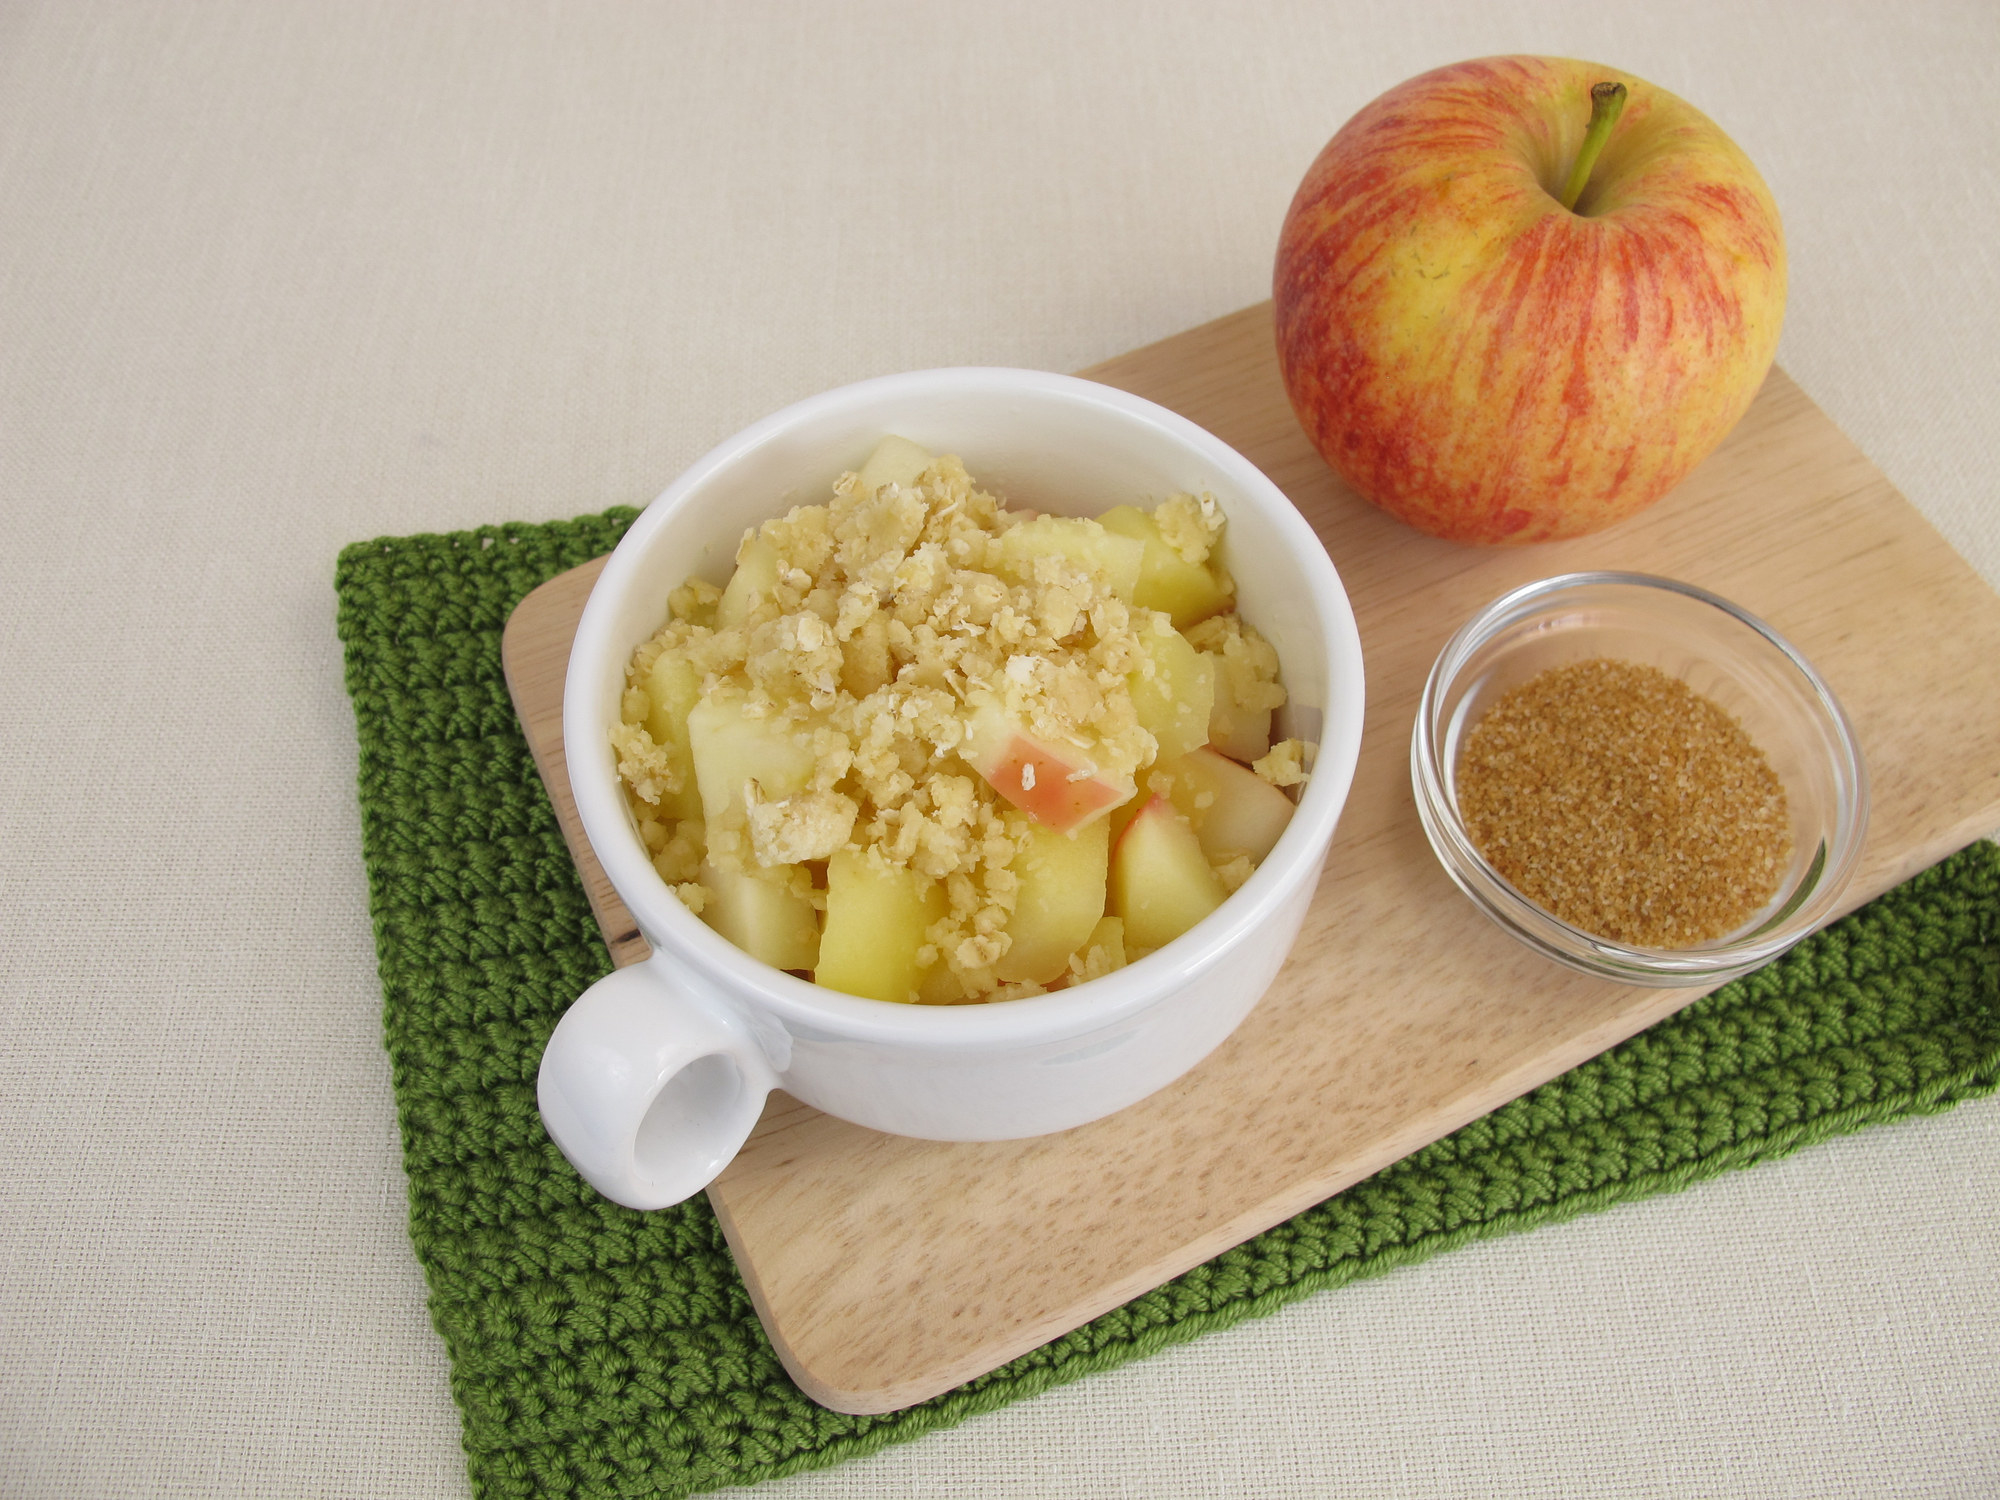 Apples and oat crumble in a mug.